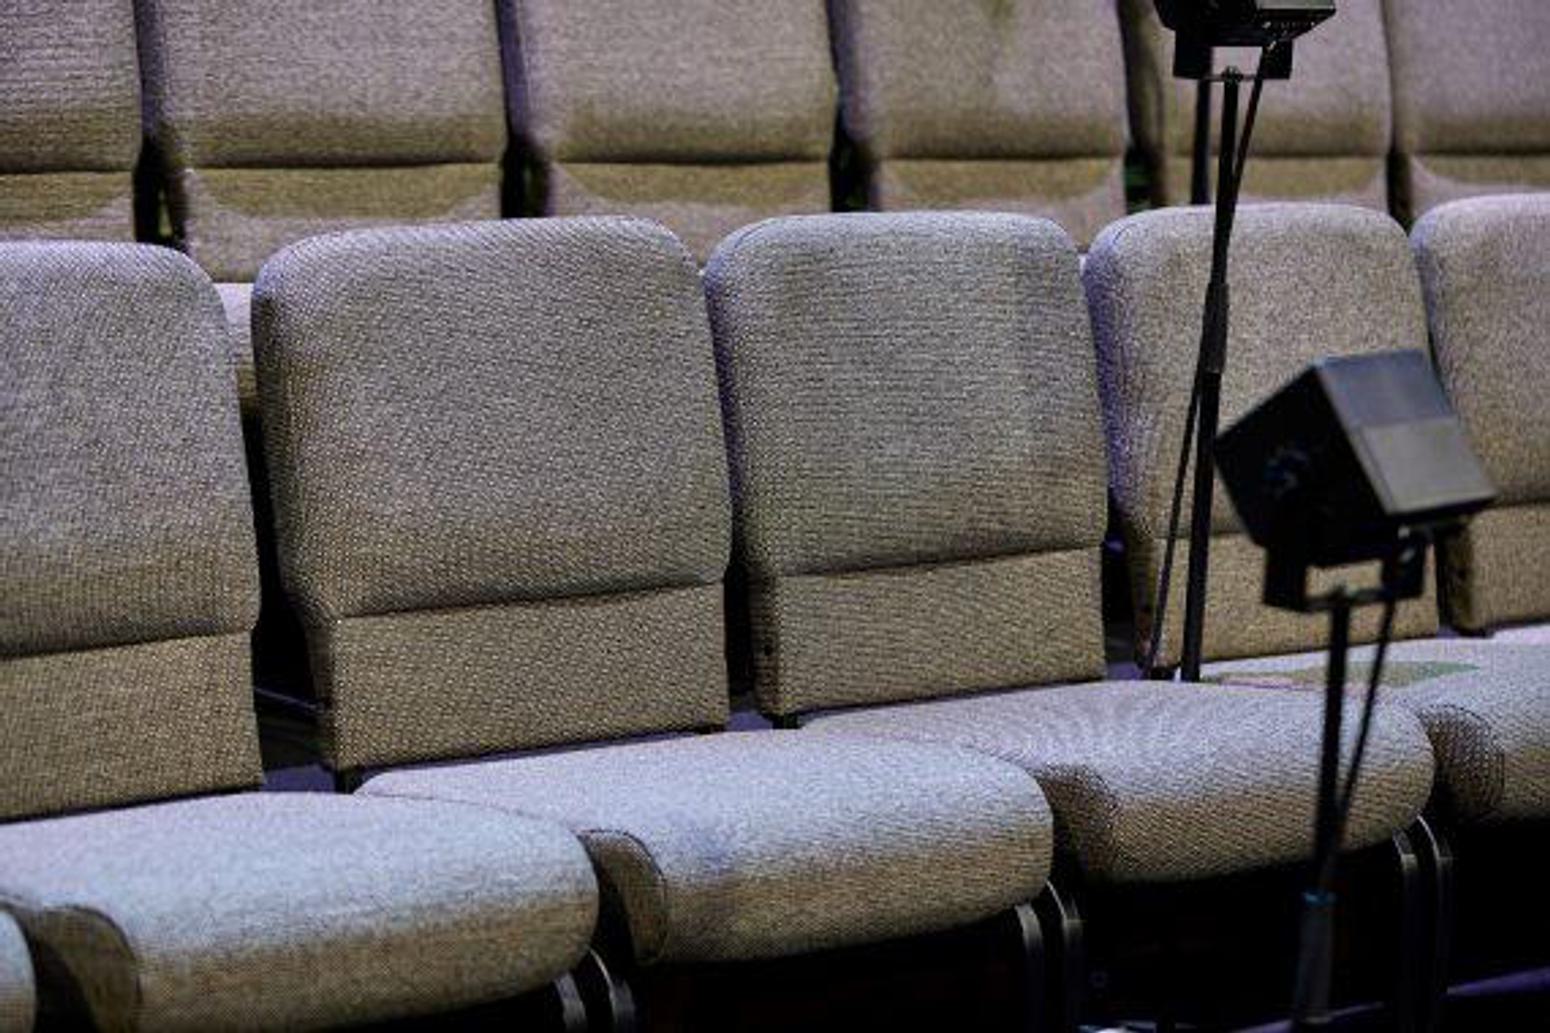 This church seating without arms increases seating capacity.